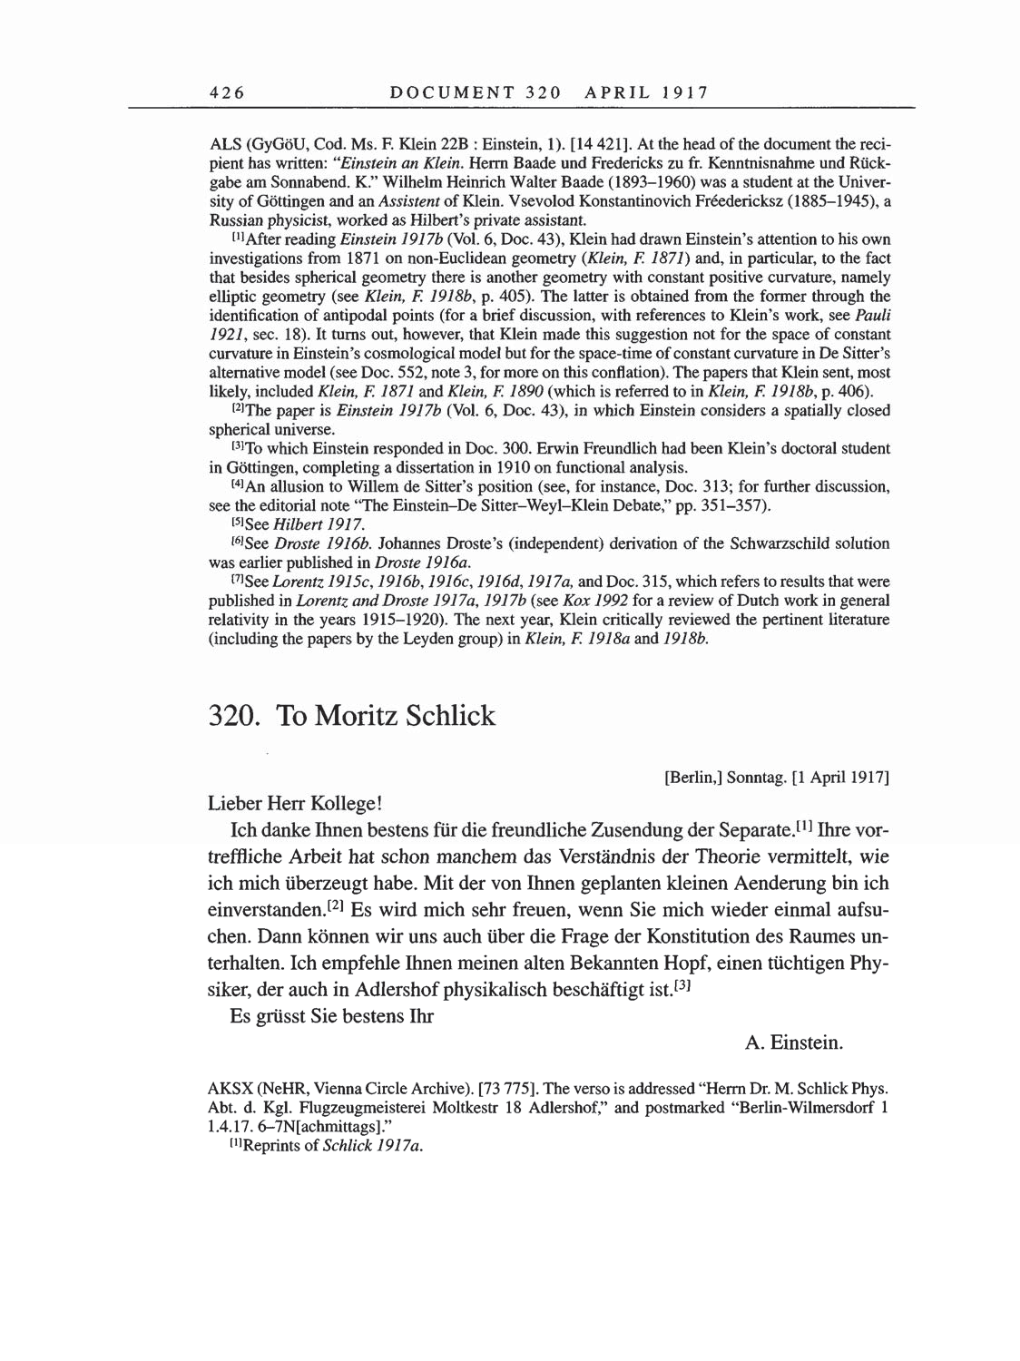 Volume 8, Part A: The Berlin Years: Correspondence 1914-1917 page 426